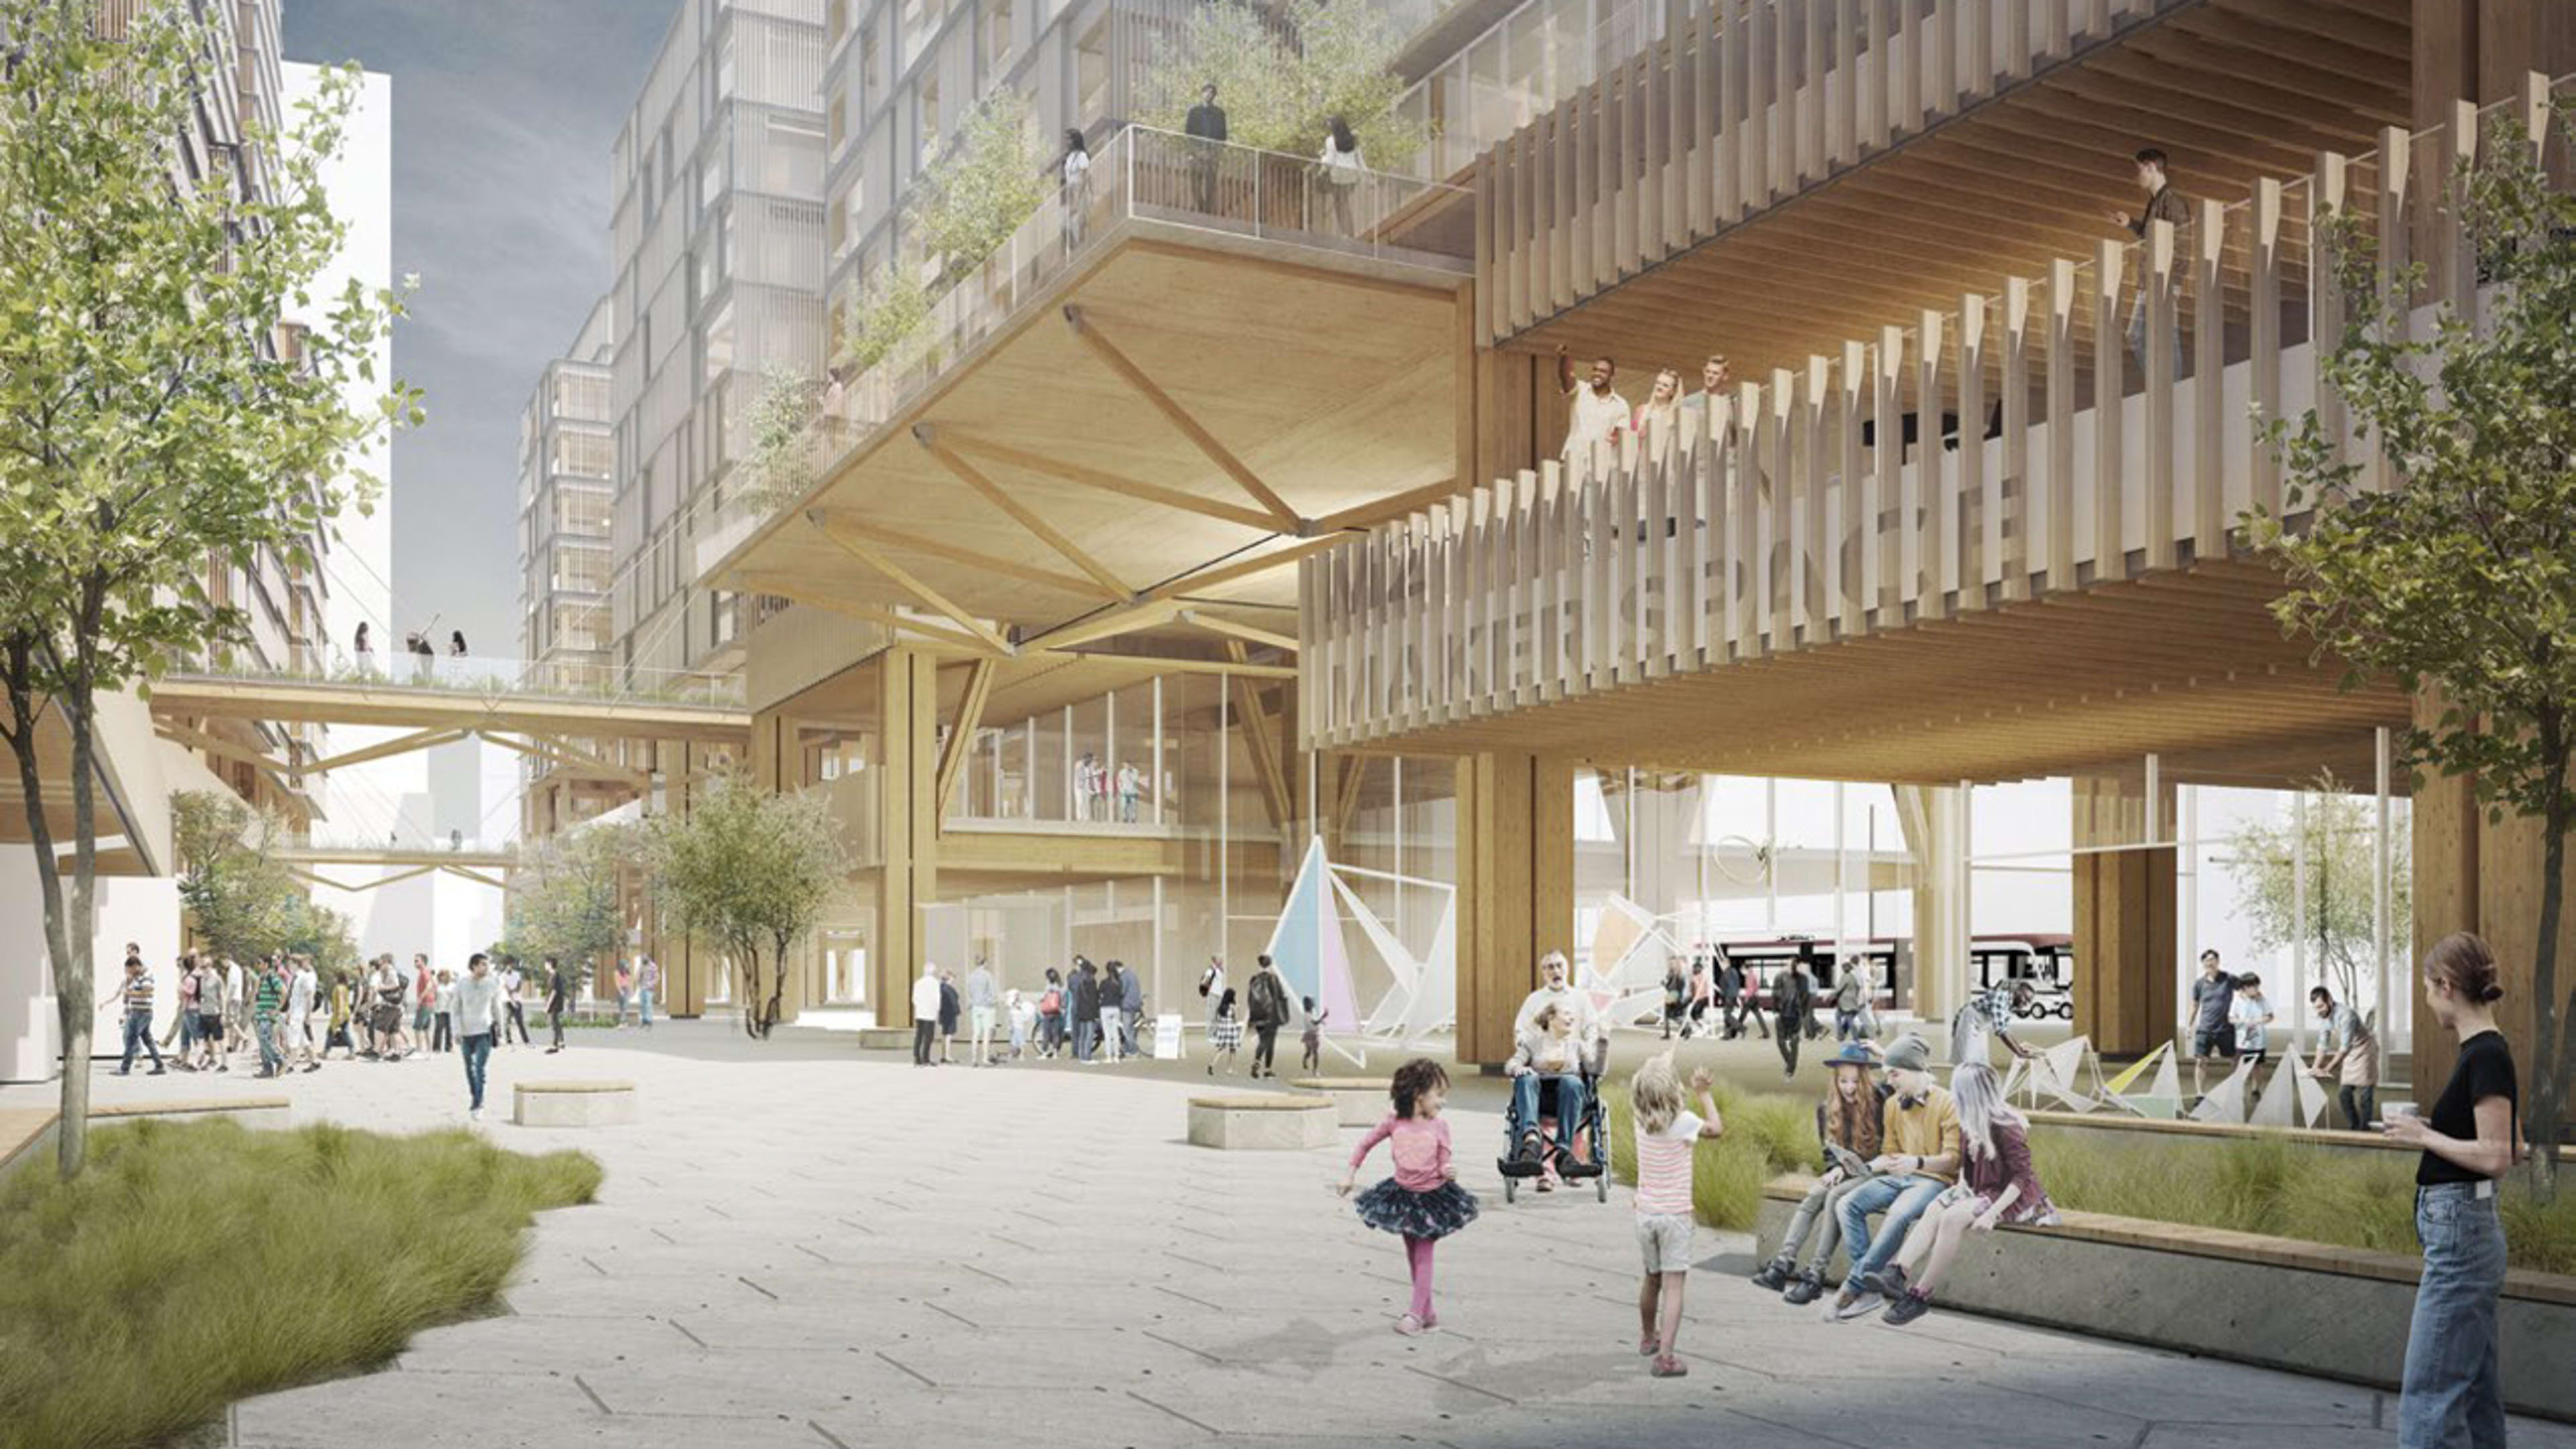 Sidewalk Labs reveals the key to its smart city plans: An $80M building factory